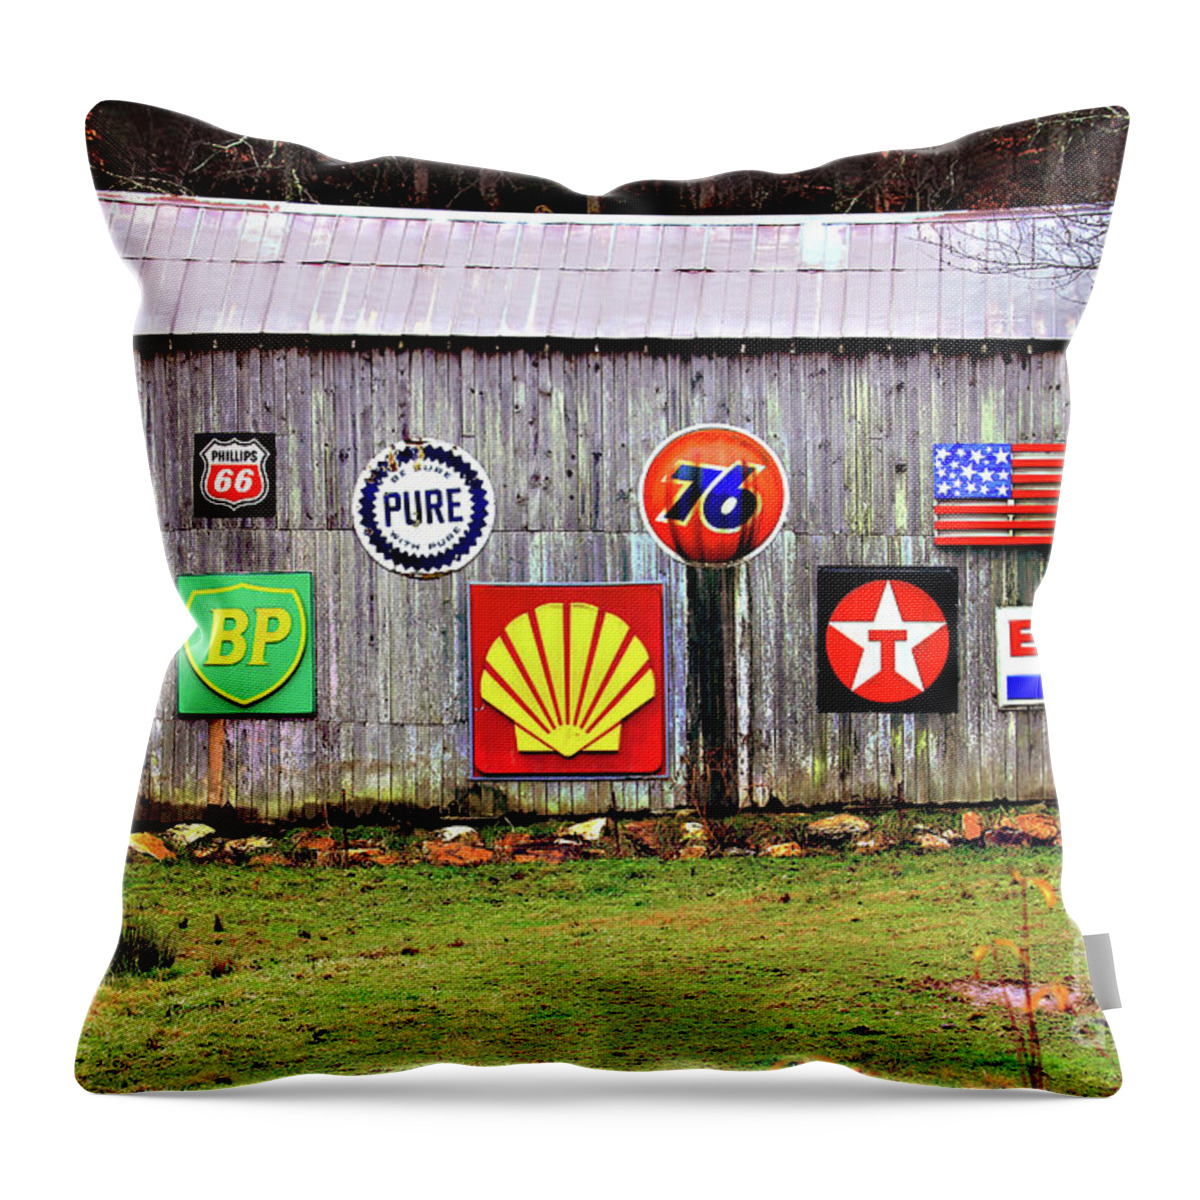 Gas From The Past Throw Pillow featuring the photograph Gas from the Past by Jennifer Robin